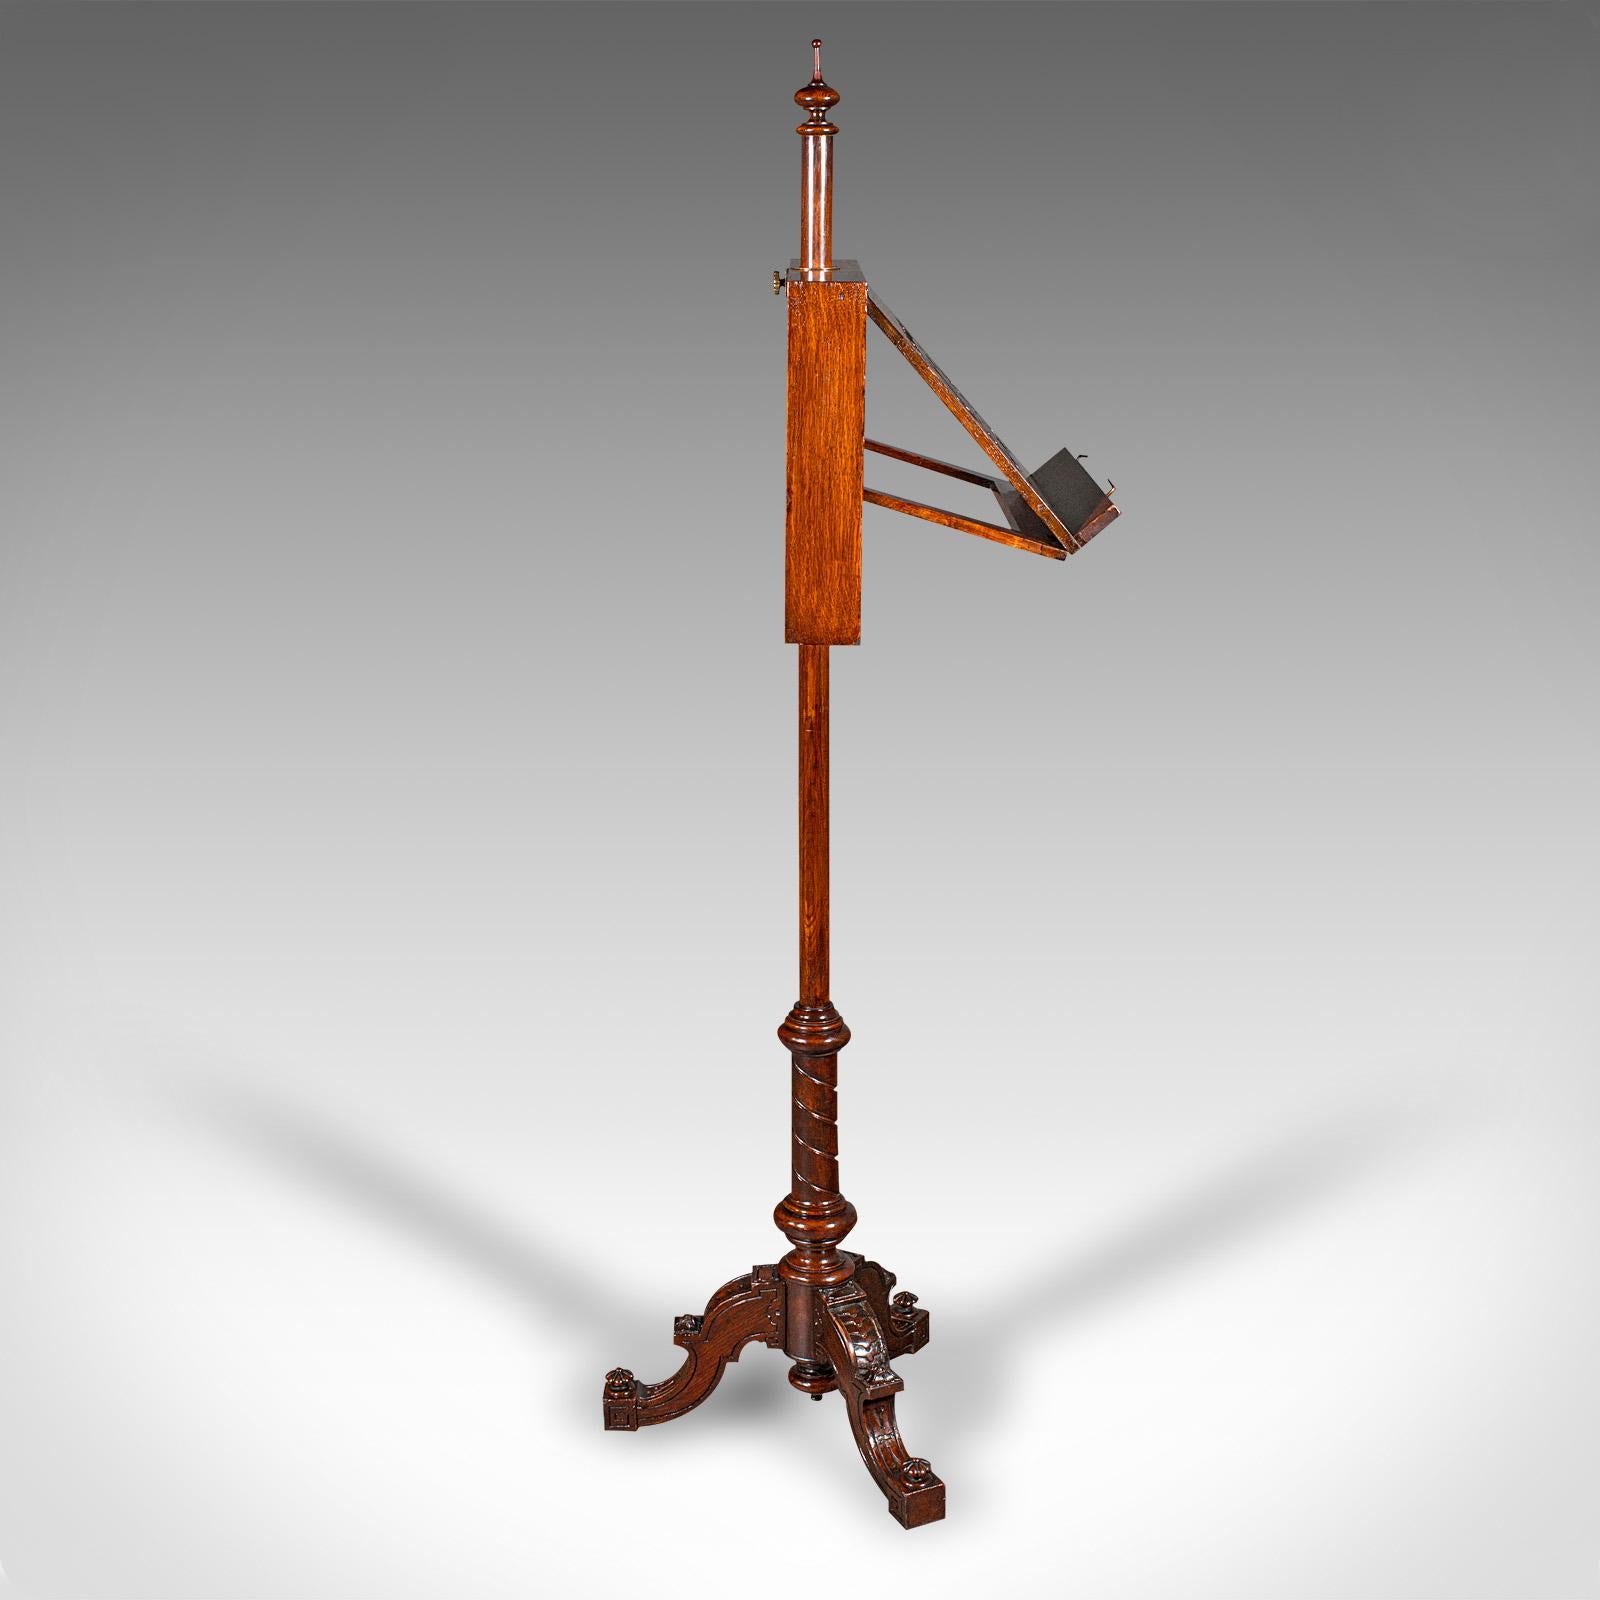 19th Century Tall Antique Music Stand, English, Oak, Adjustable Recital Rest, Victorian, 1880 For Sale